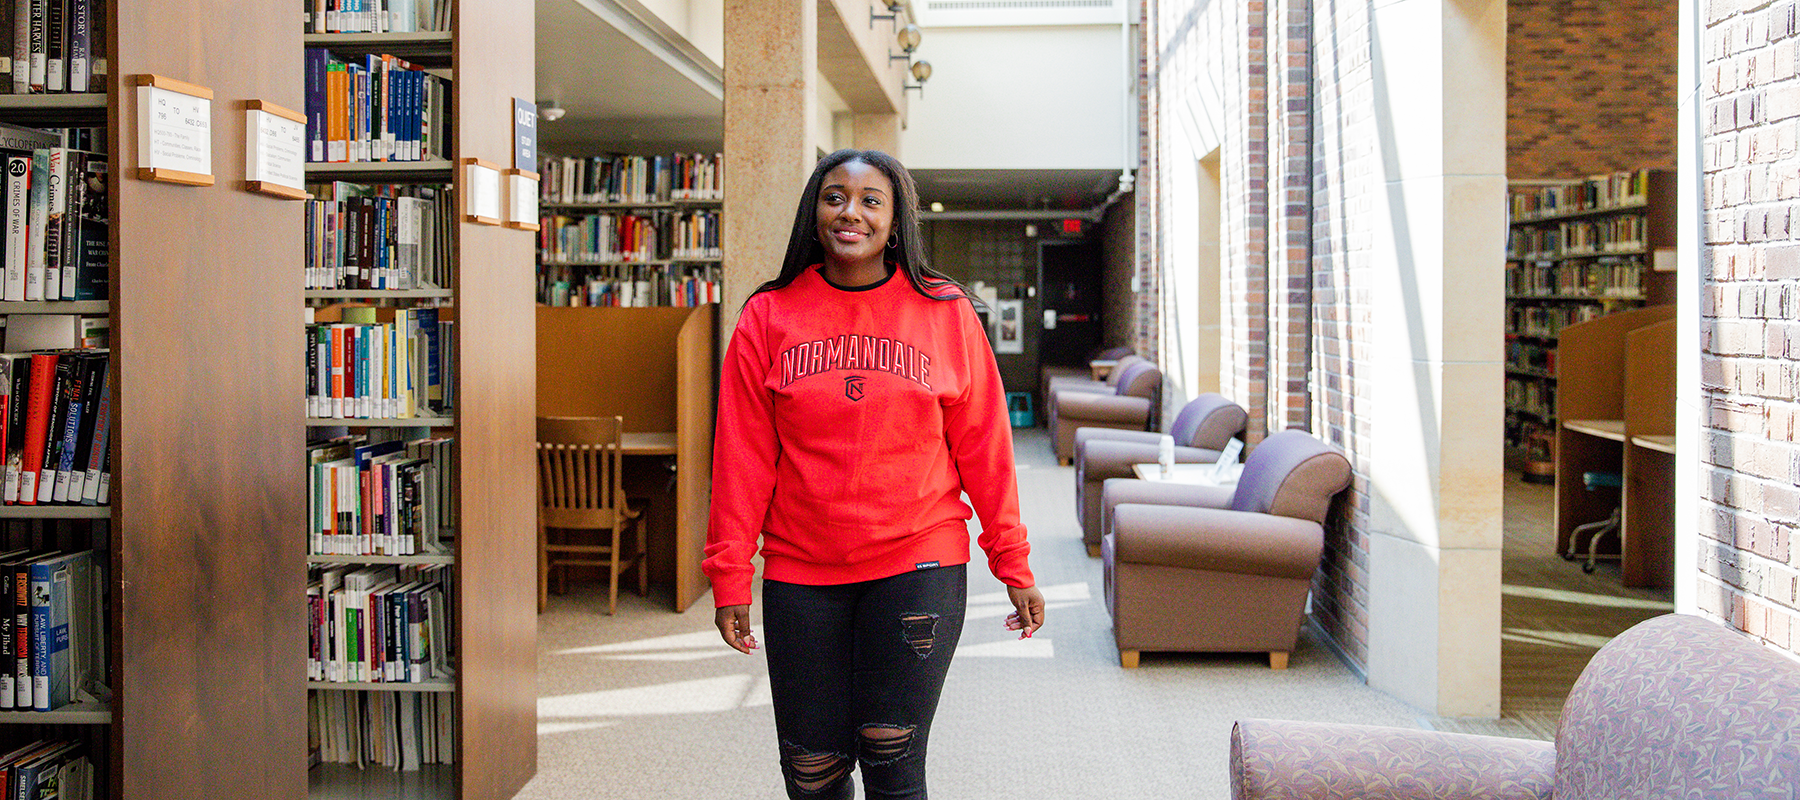 Smiling student in a red Normandale sweatshirt walks through the library.